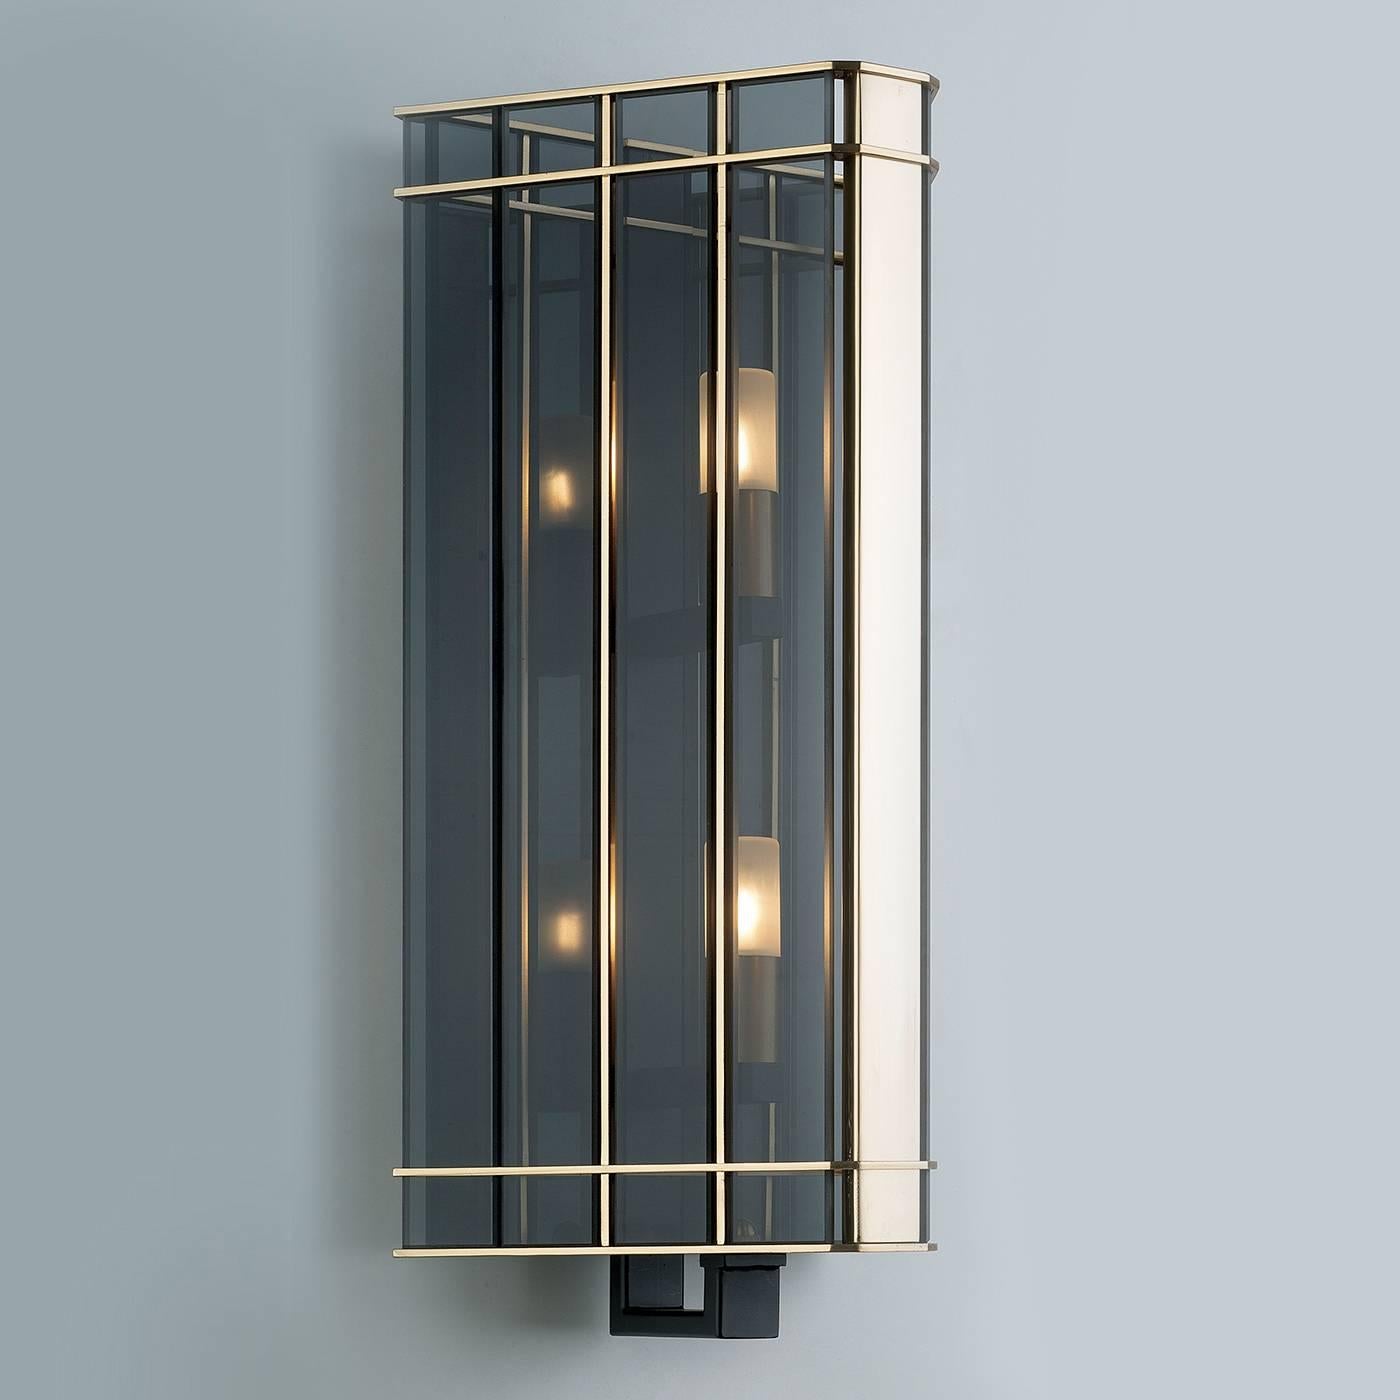 This striking sconce combines traditional crafting methods with a modern design inspired by the art deco's lavish style. The result is a timeless piece that will make a sophisticated statement in an entryway, a living room, even a bedroom. The